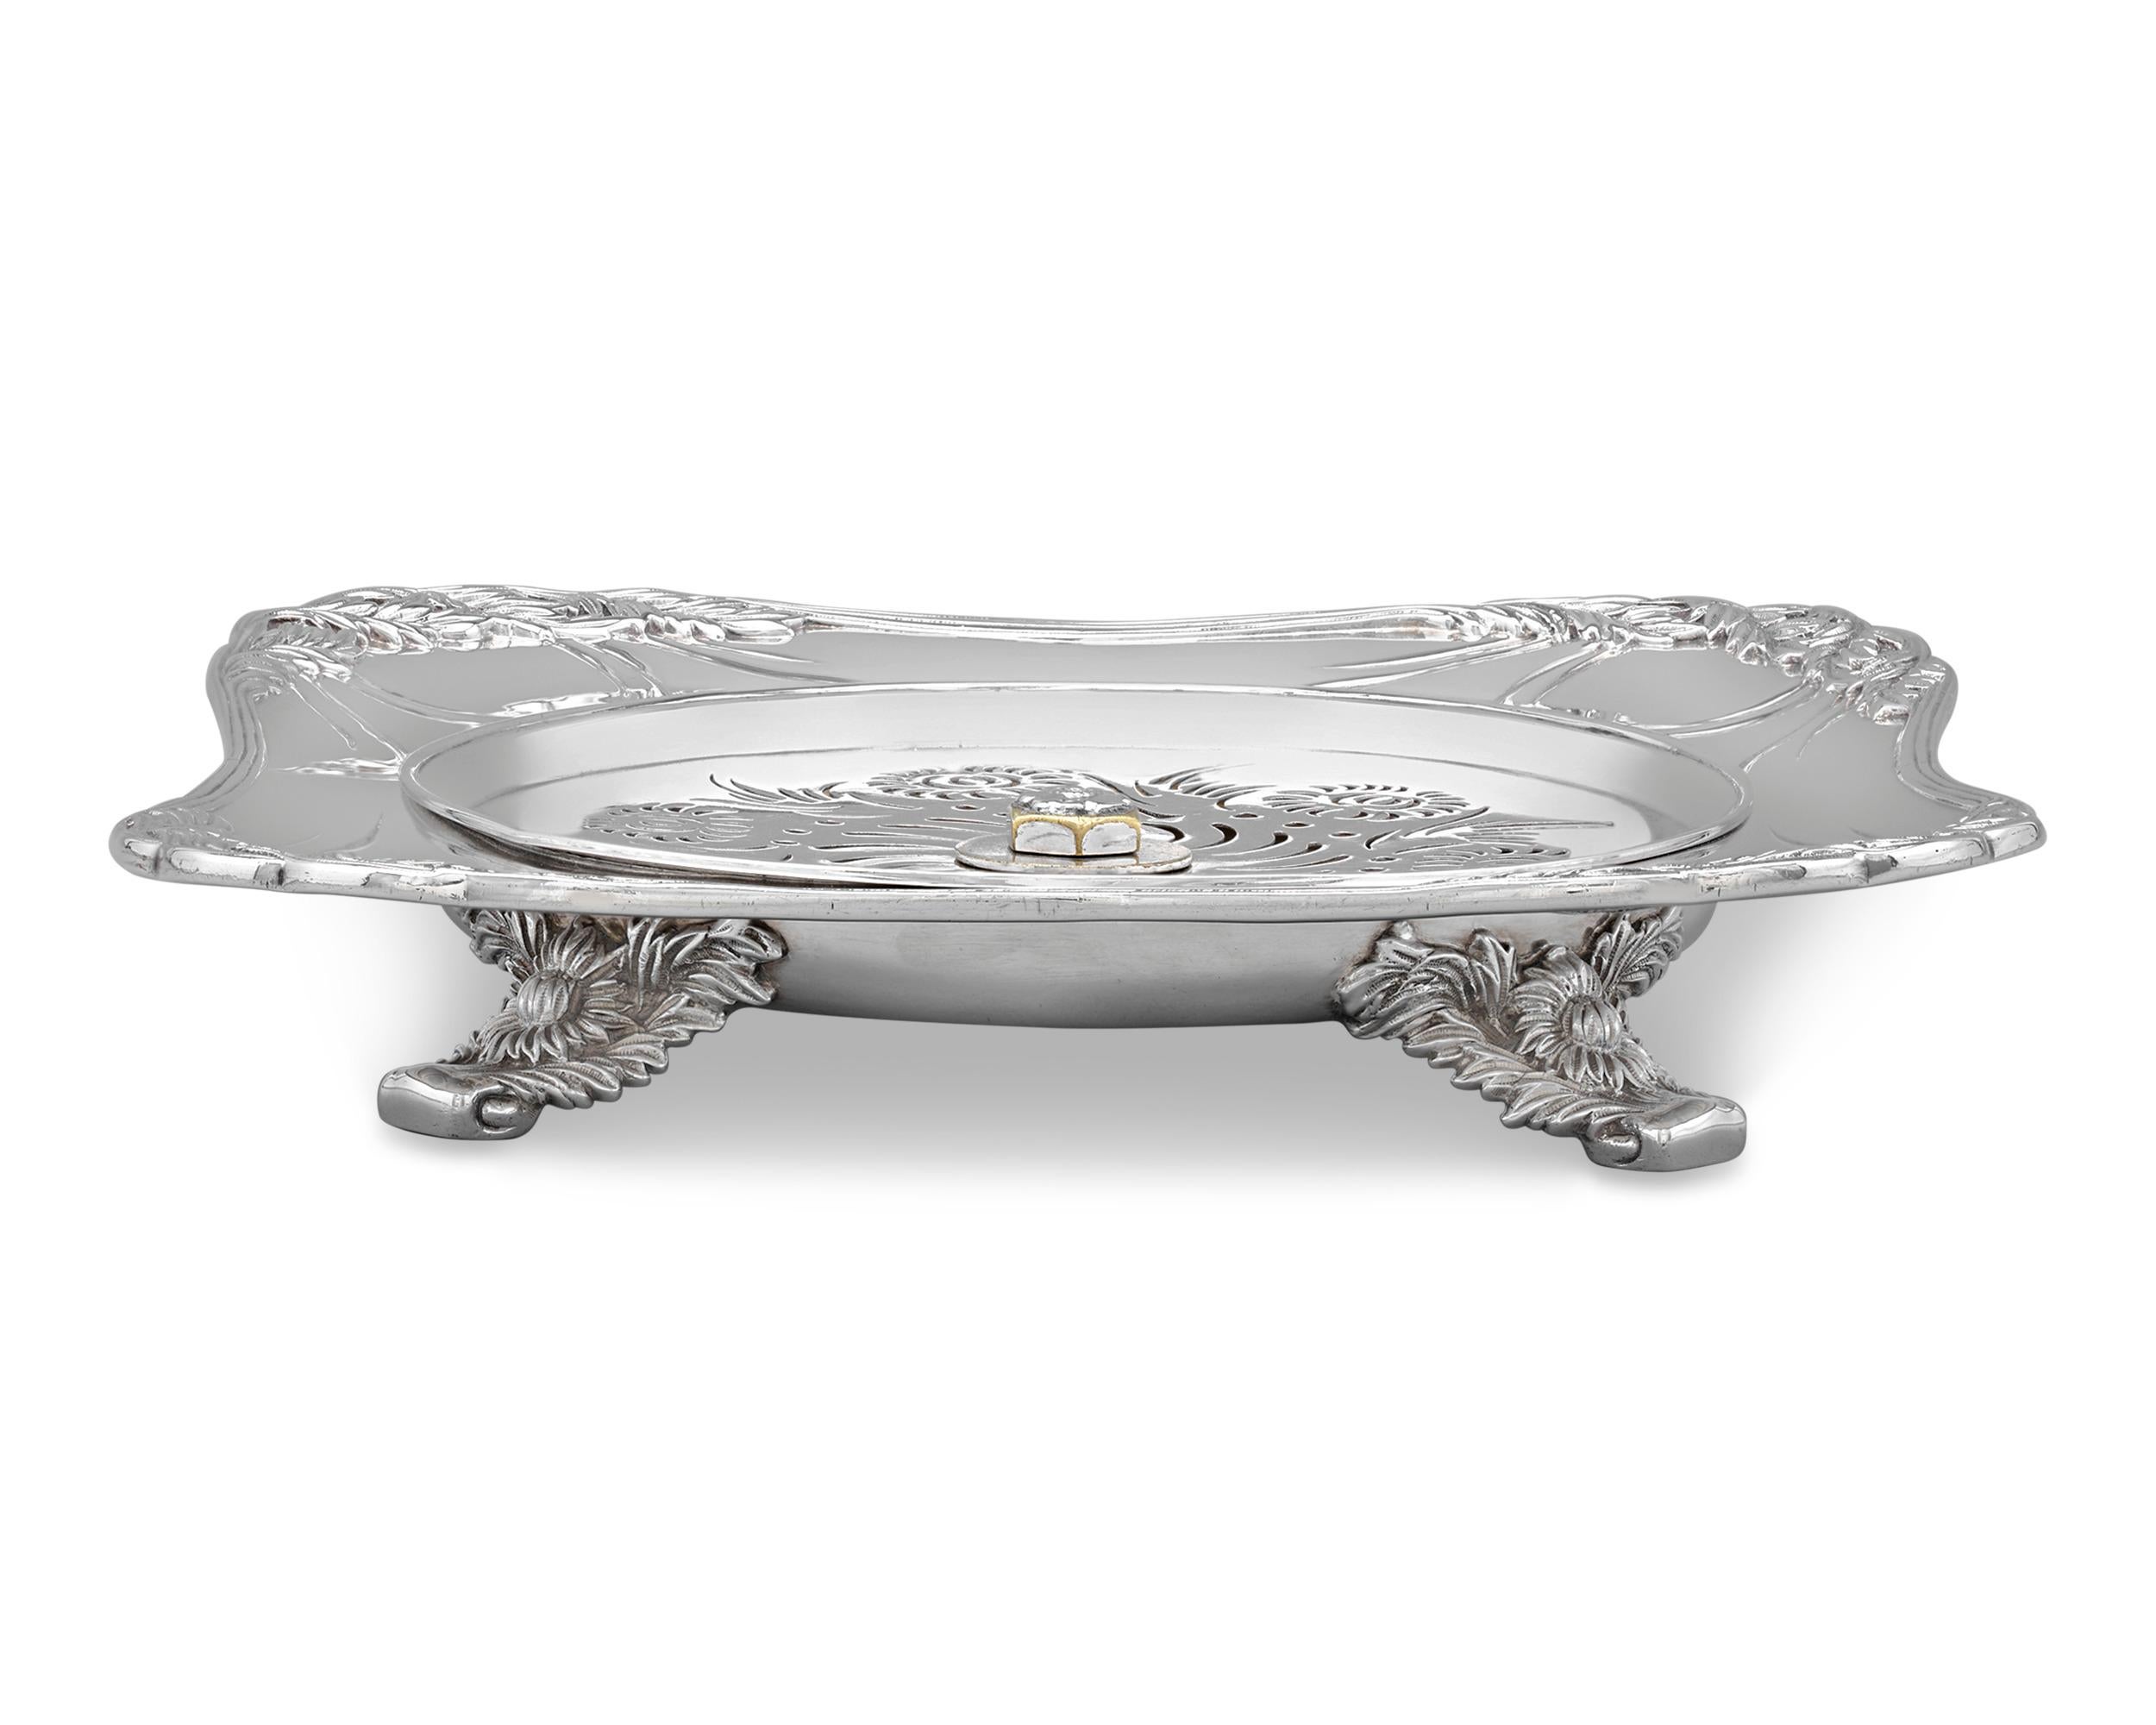 This charming sterling silver caviar server was crafted by the celebrated Tiffany & Co. in the firm's highly popular Chrysanthemum pattern. The dish is ingeniously designed to keep caviar at the perfect temperature, with a removable pierced tray at